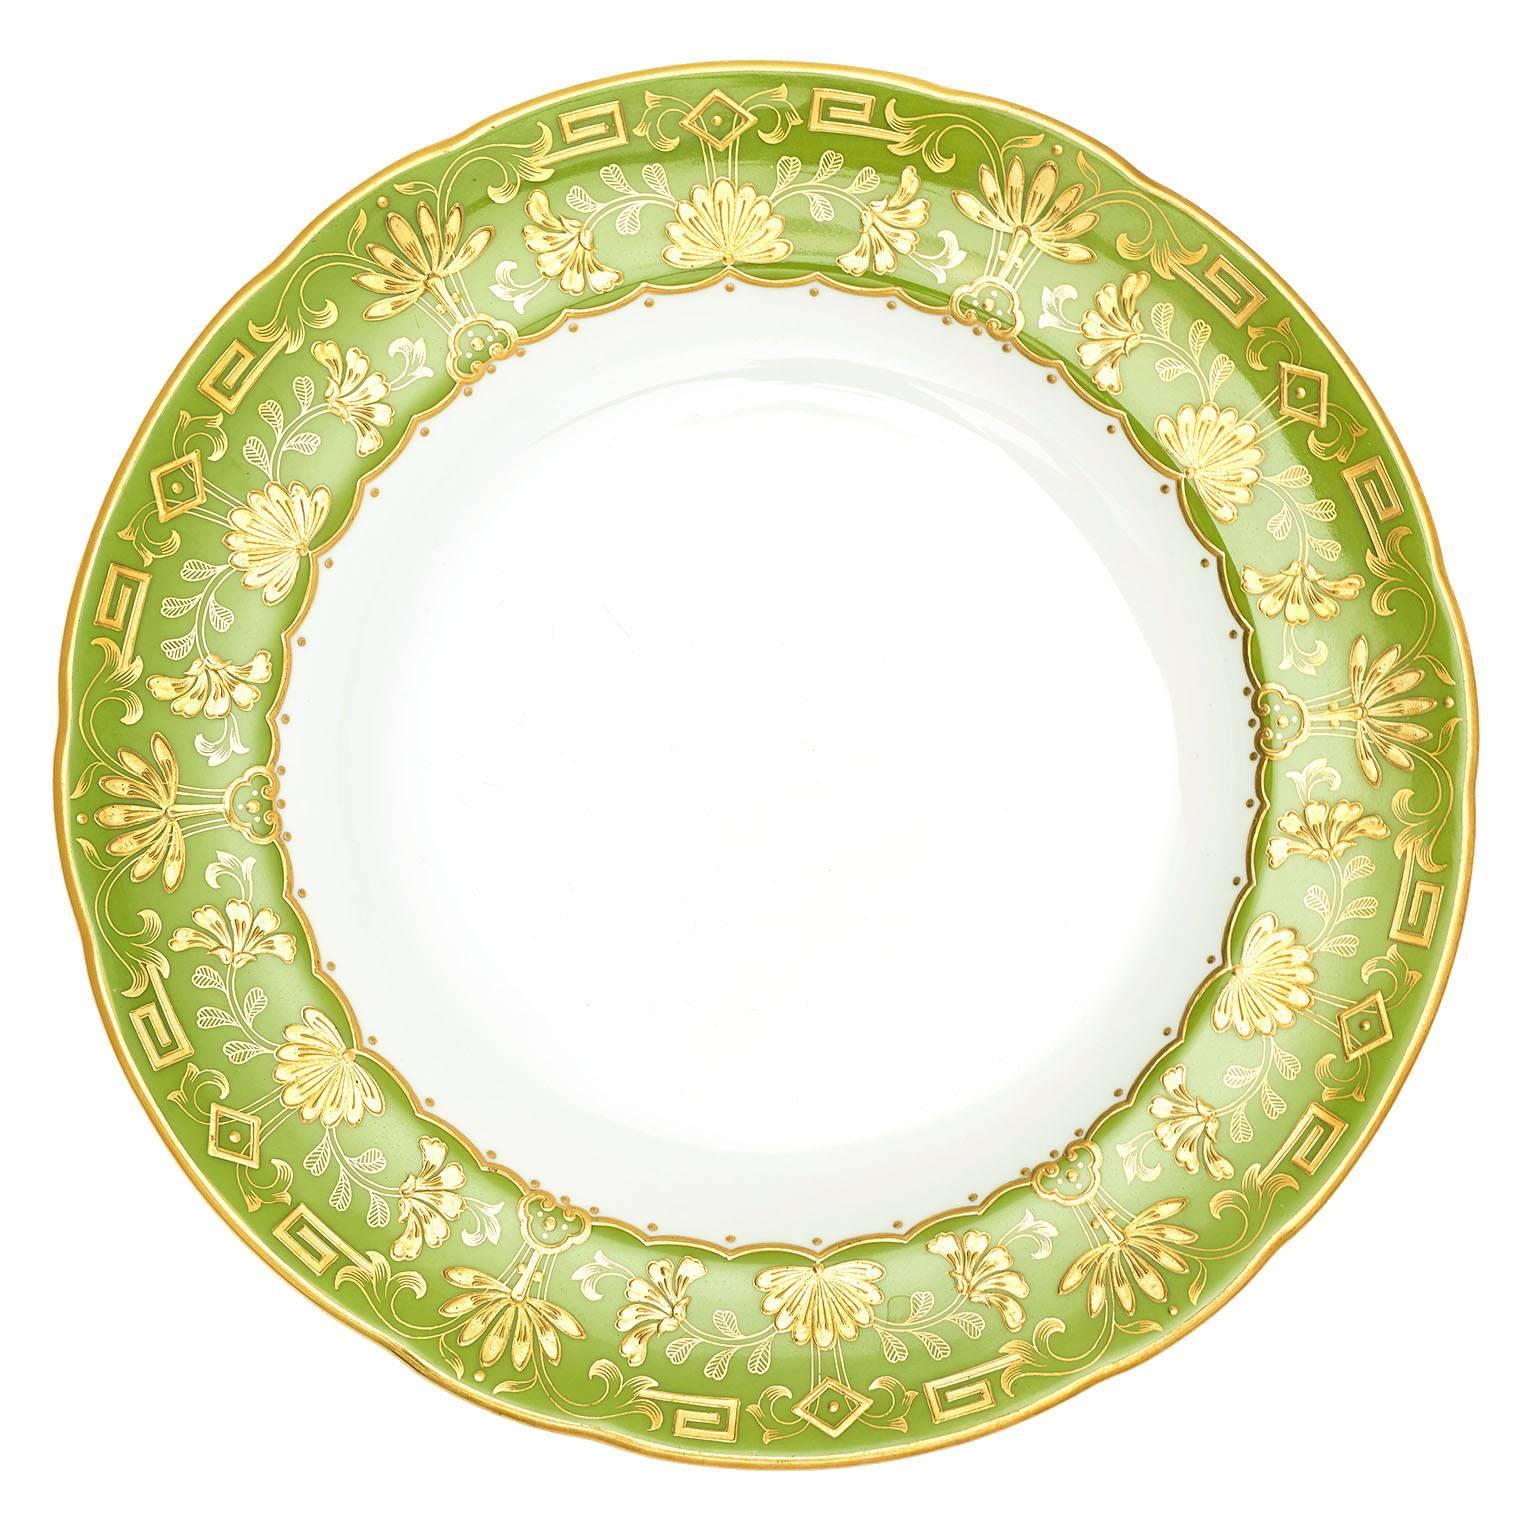 Minton, England, circa 1890s. 12 plates. Caught somewhere between the Japonaise aesthetic and the Arts and Crafts movement, these beautiful Victorian-era plates feature bright spring-green borders enhanced by superb raised gold detail. Floral and